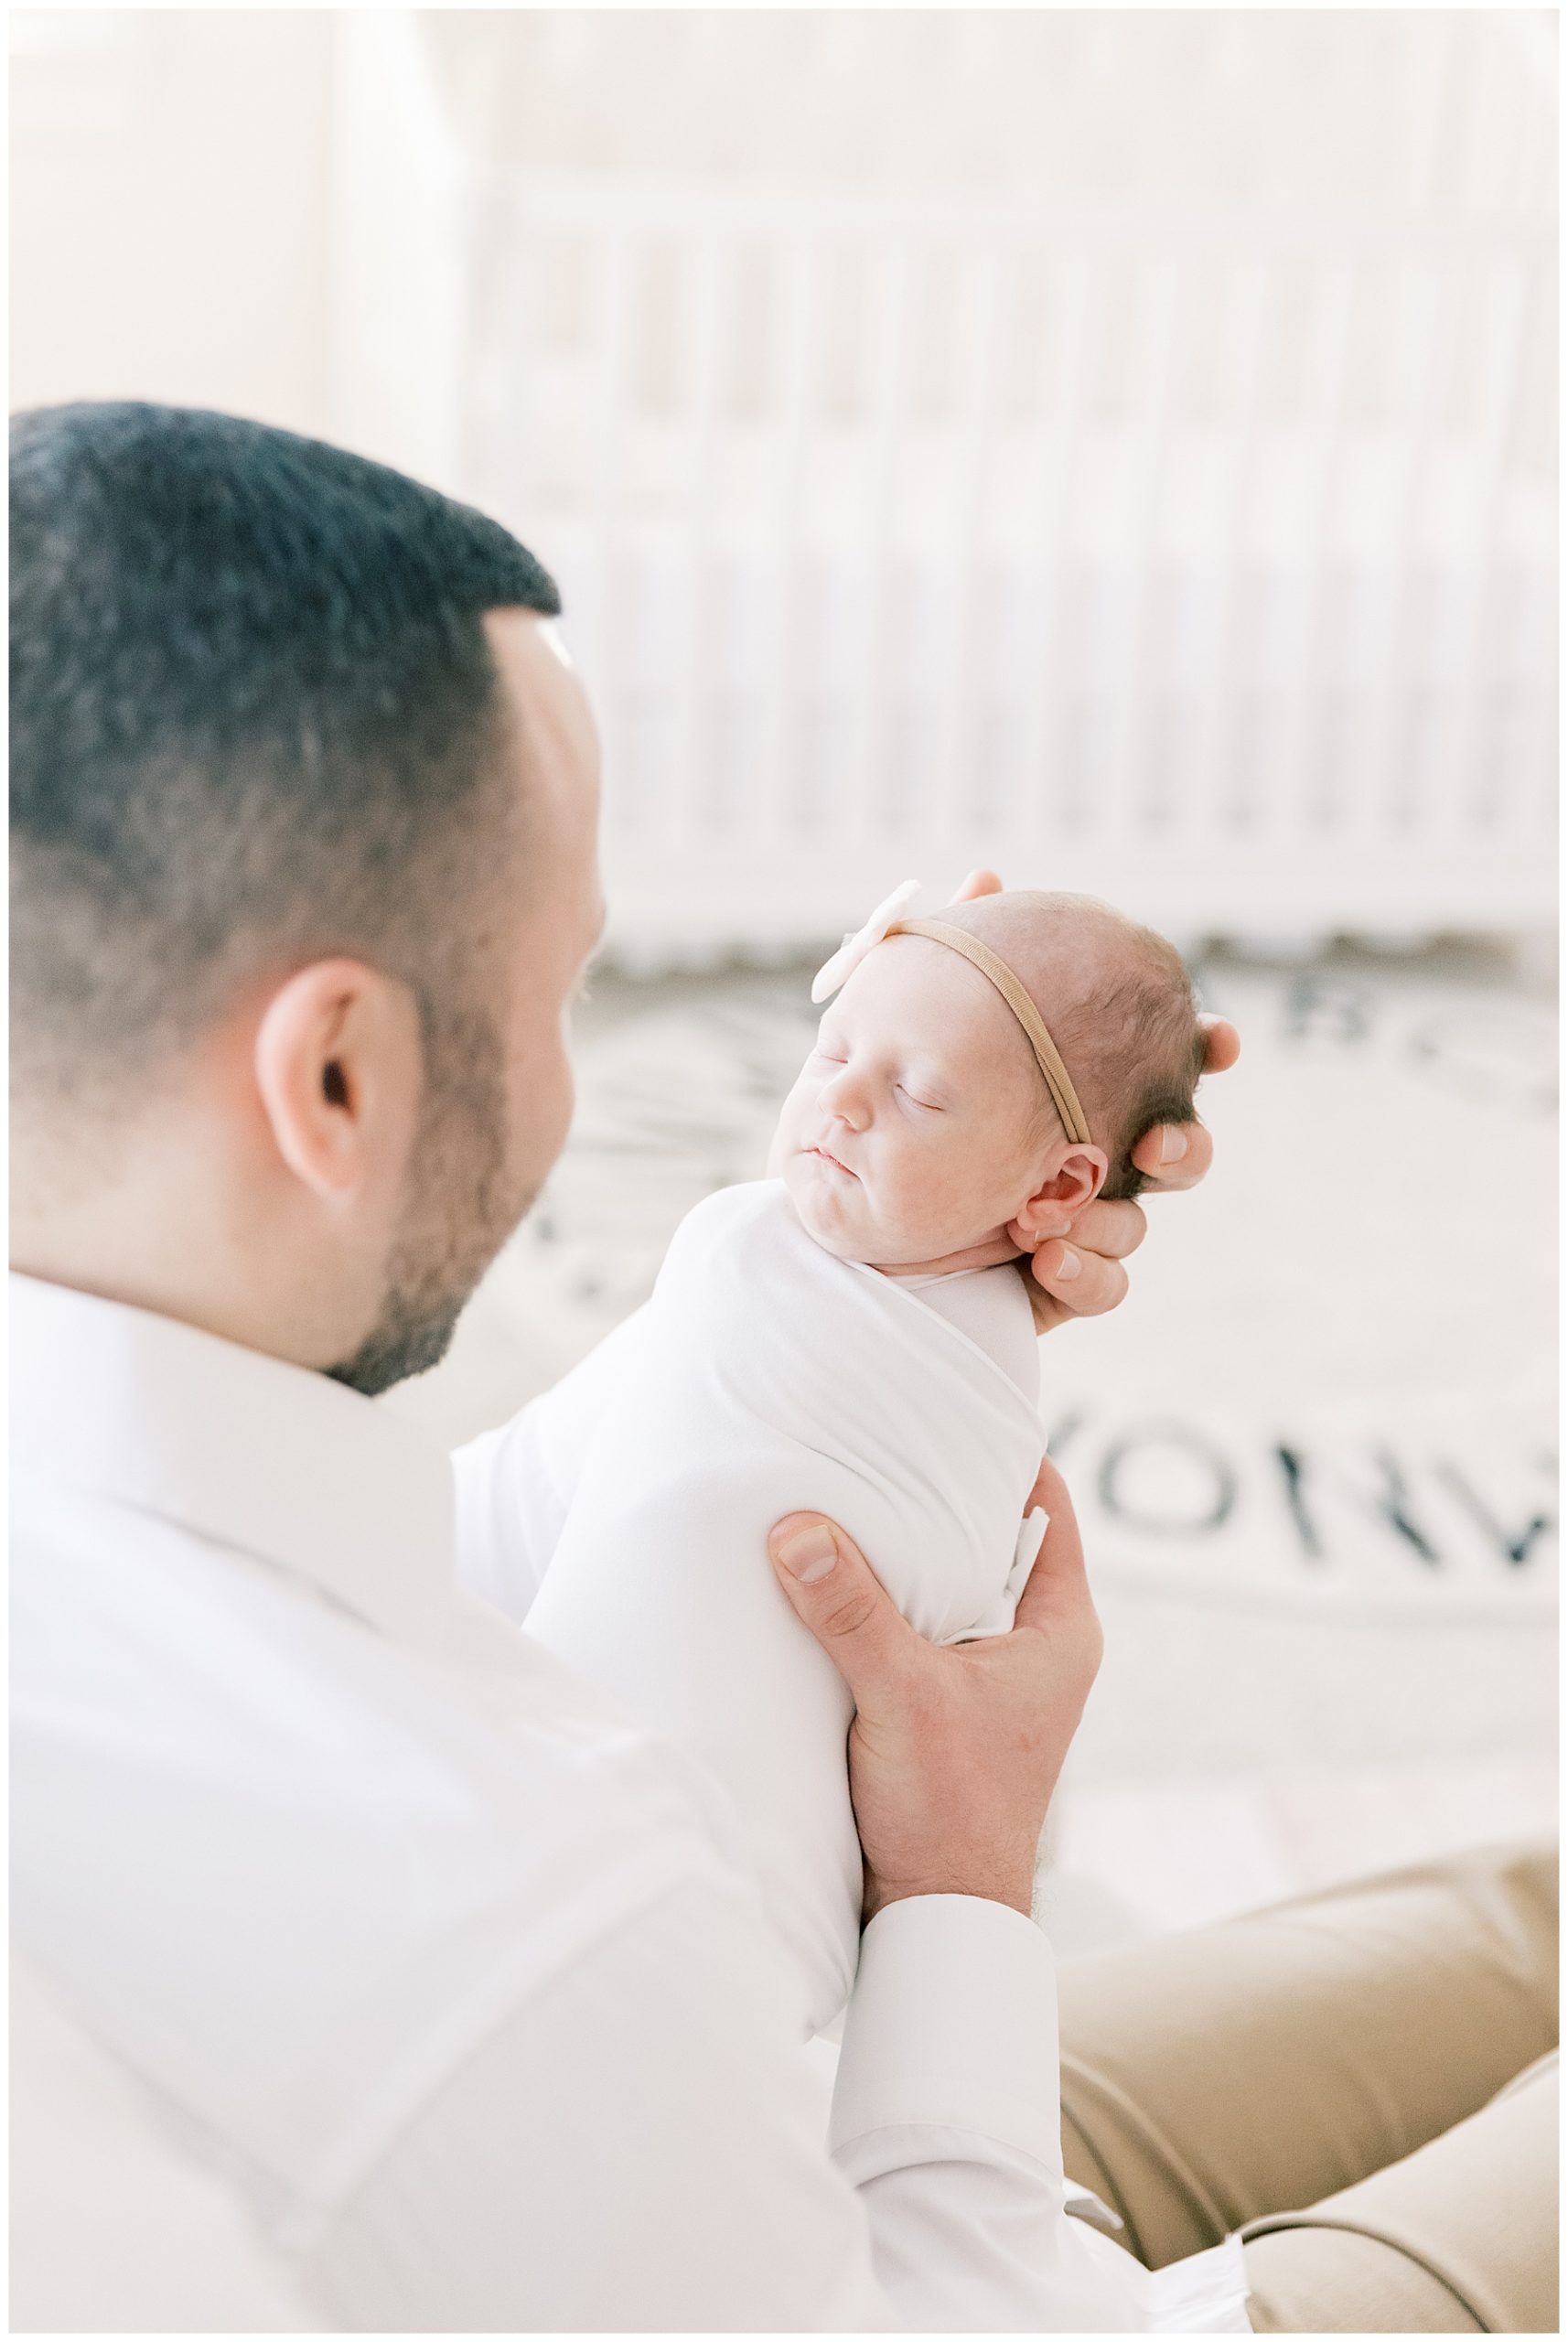 dad holing newborn baby during lifetsyle newborn session - Katie Petrick Photography